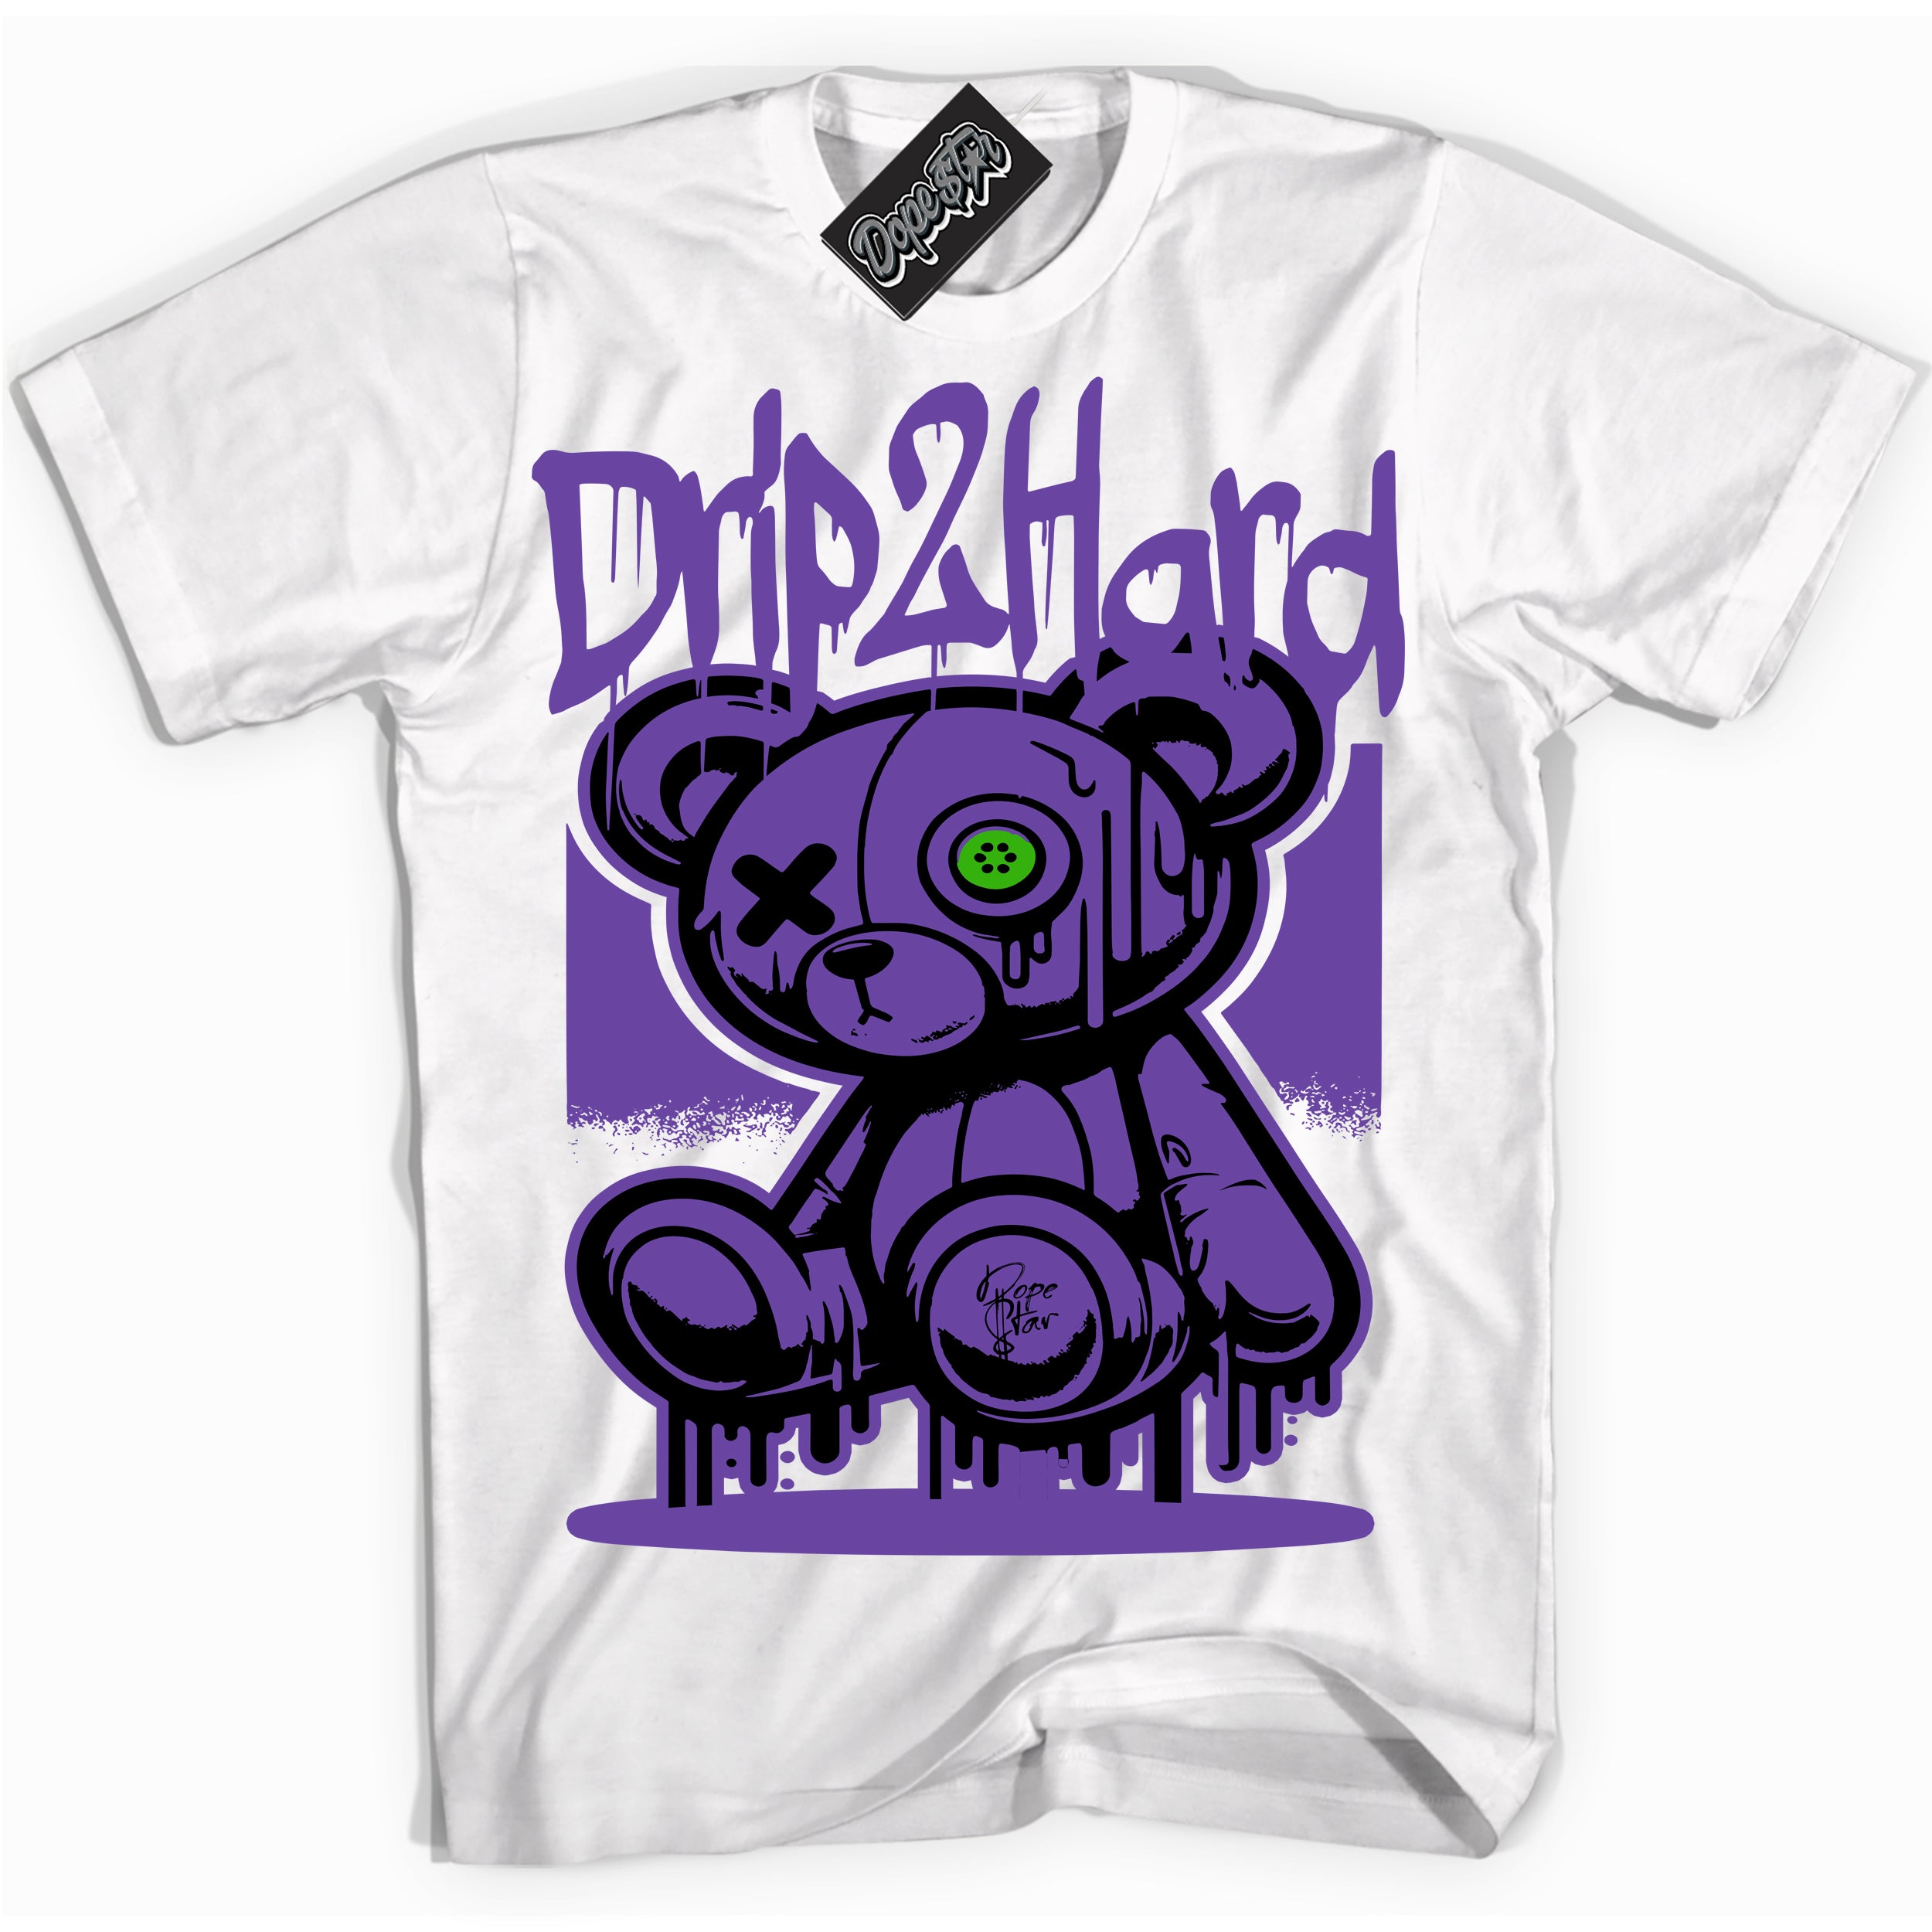 Cool White graphic tee with “ Drip 2 Hard ” design, that perfectly matches Court Purple 13s 